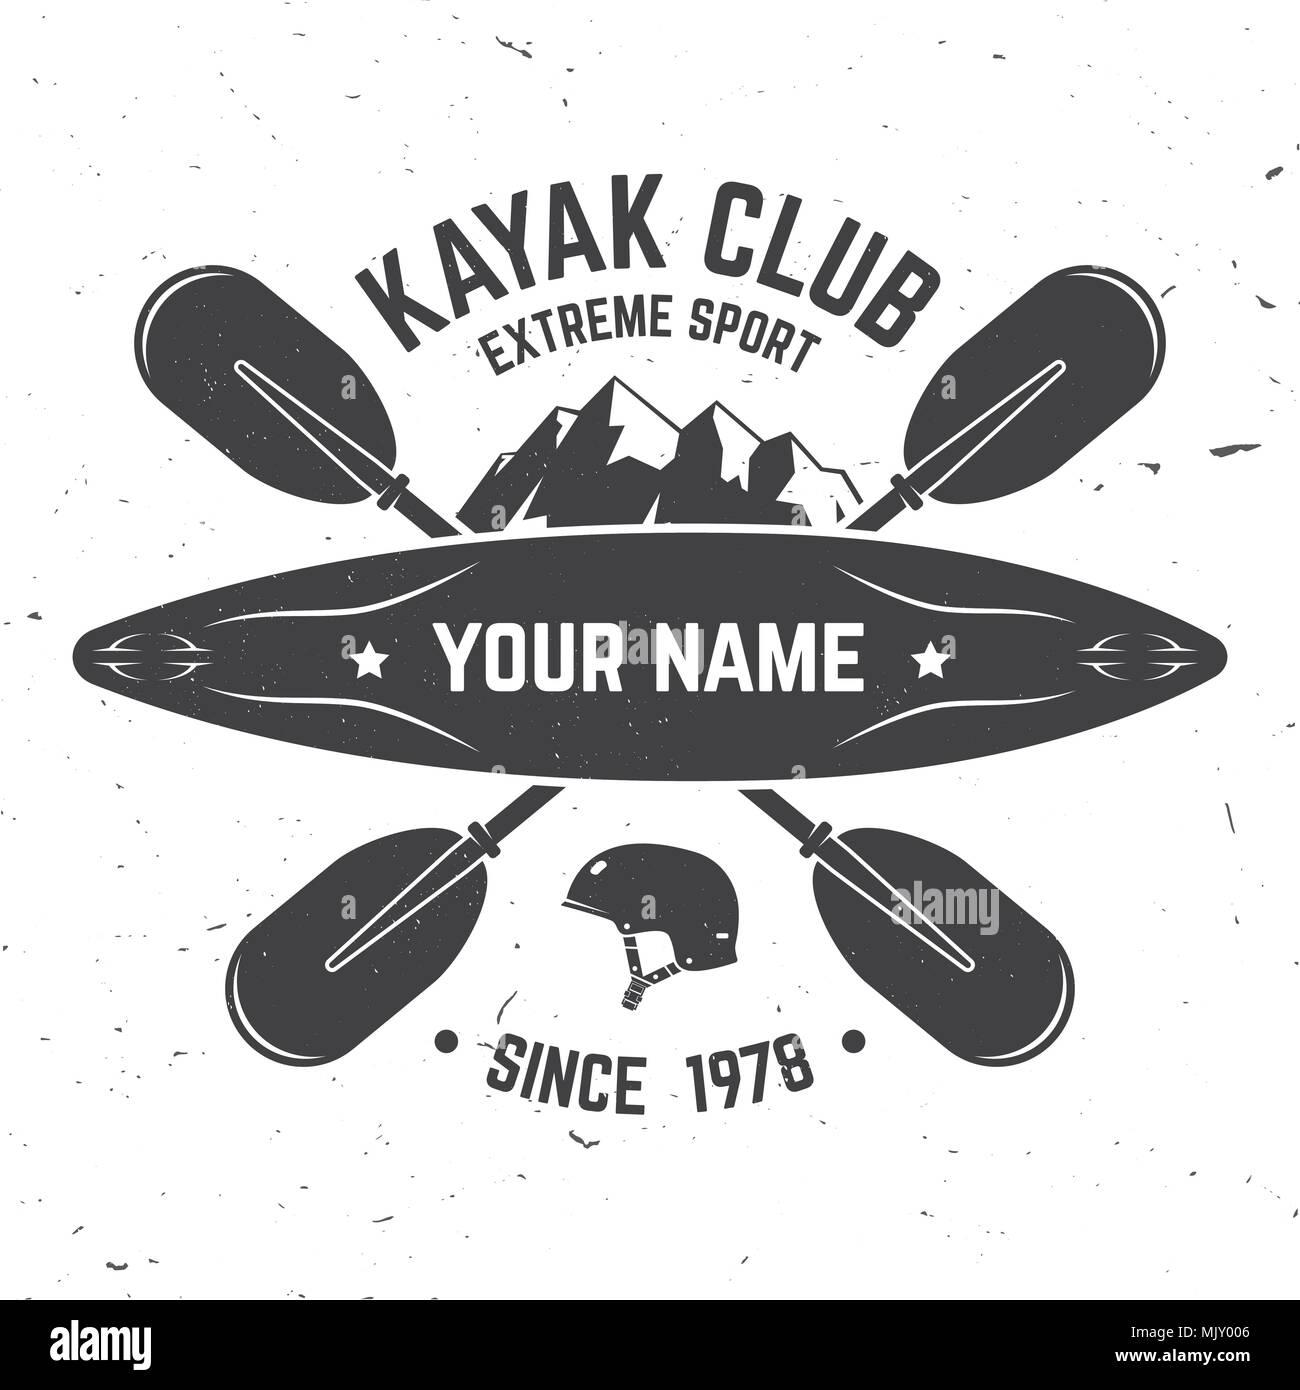 Kayak Club. Vector illustration. Concept for shirt, print, stamp or tee. Vintage typography design with mountain, helmet and boat silhouette. Extreme  Stock Vector